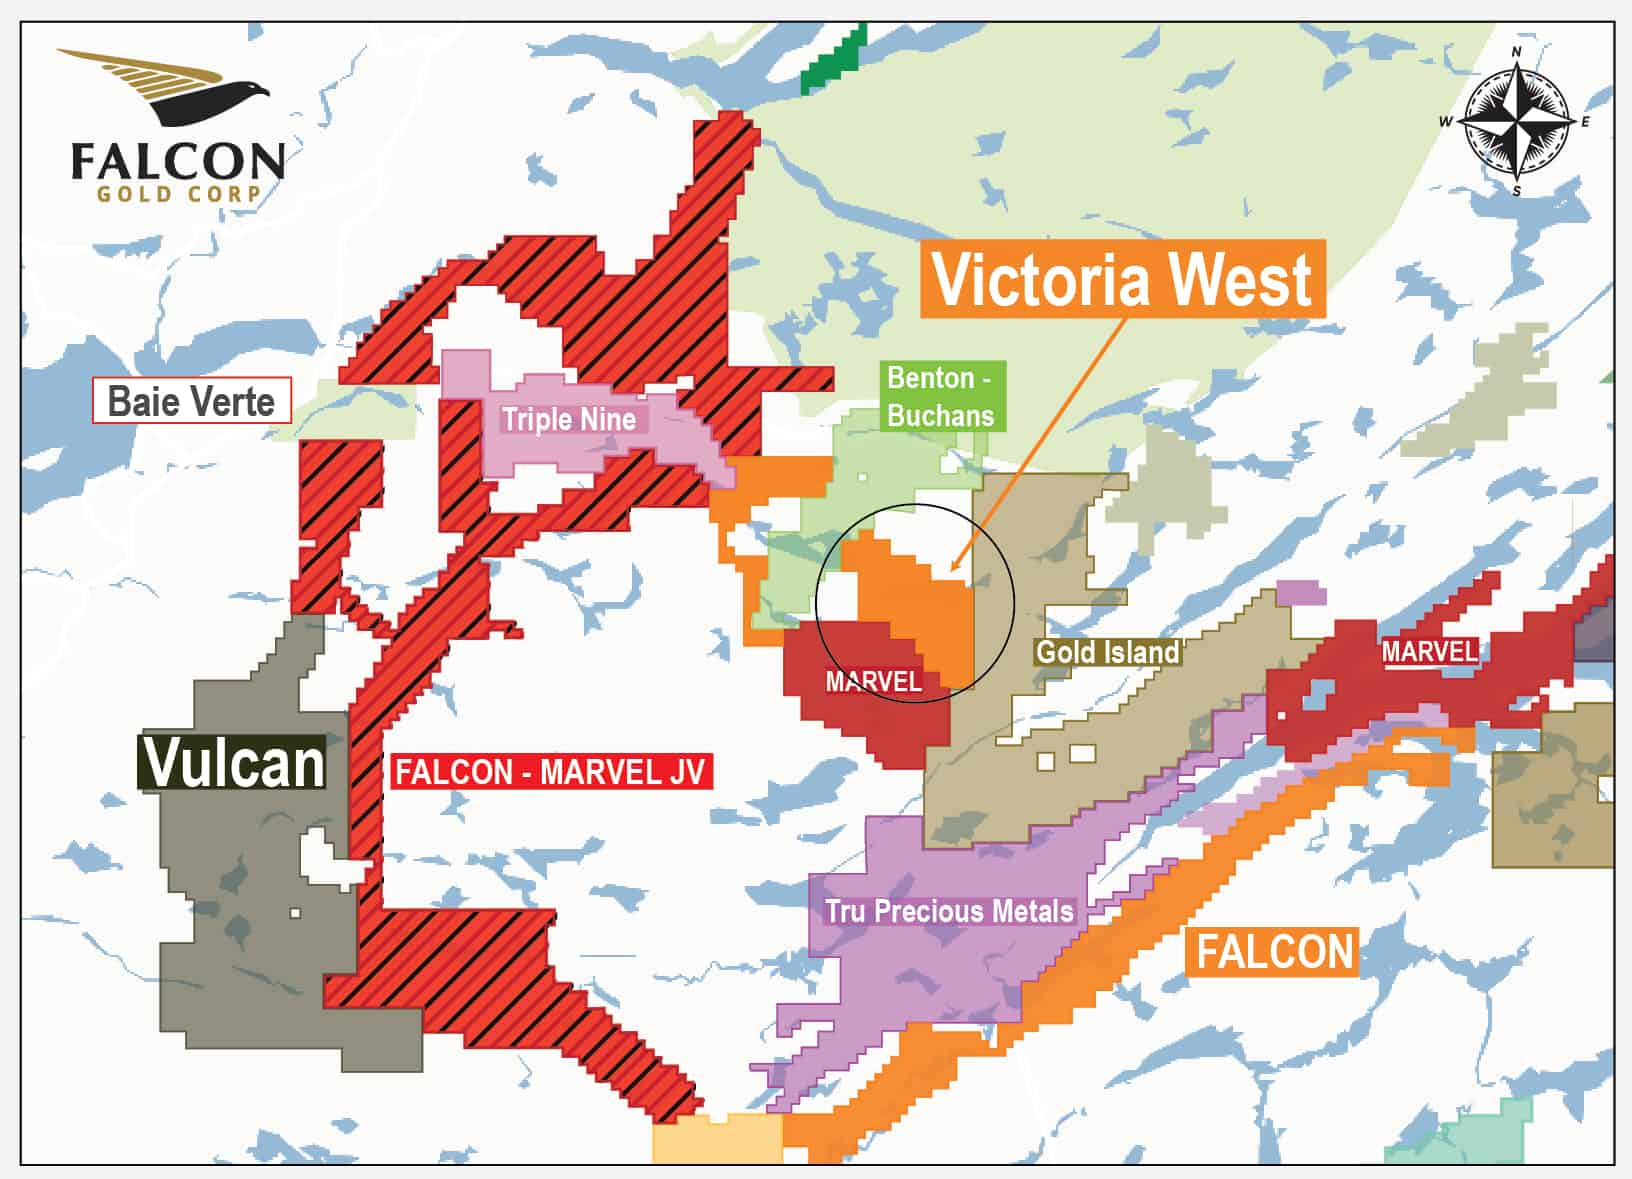 Victoria West, NL Falcon Gold Corp Victoria West, NL Victoria West (the “Property”) consists of 166 claims (4,150 hectares) and is contiguous to Marvel Discovery Corp, Benton Resources, Buchans Minerals Corp. and a significant land package staked by Shawn Ryan.